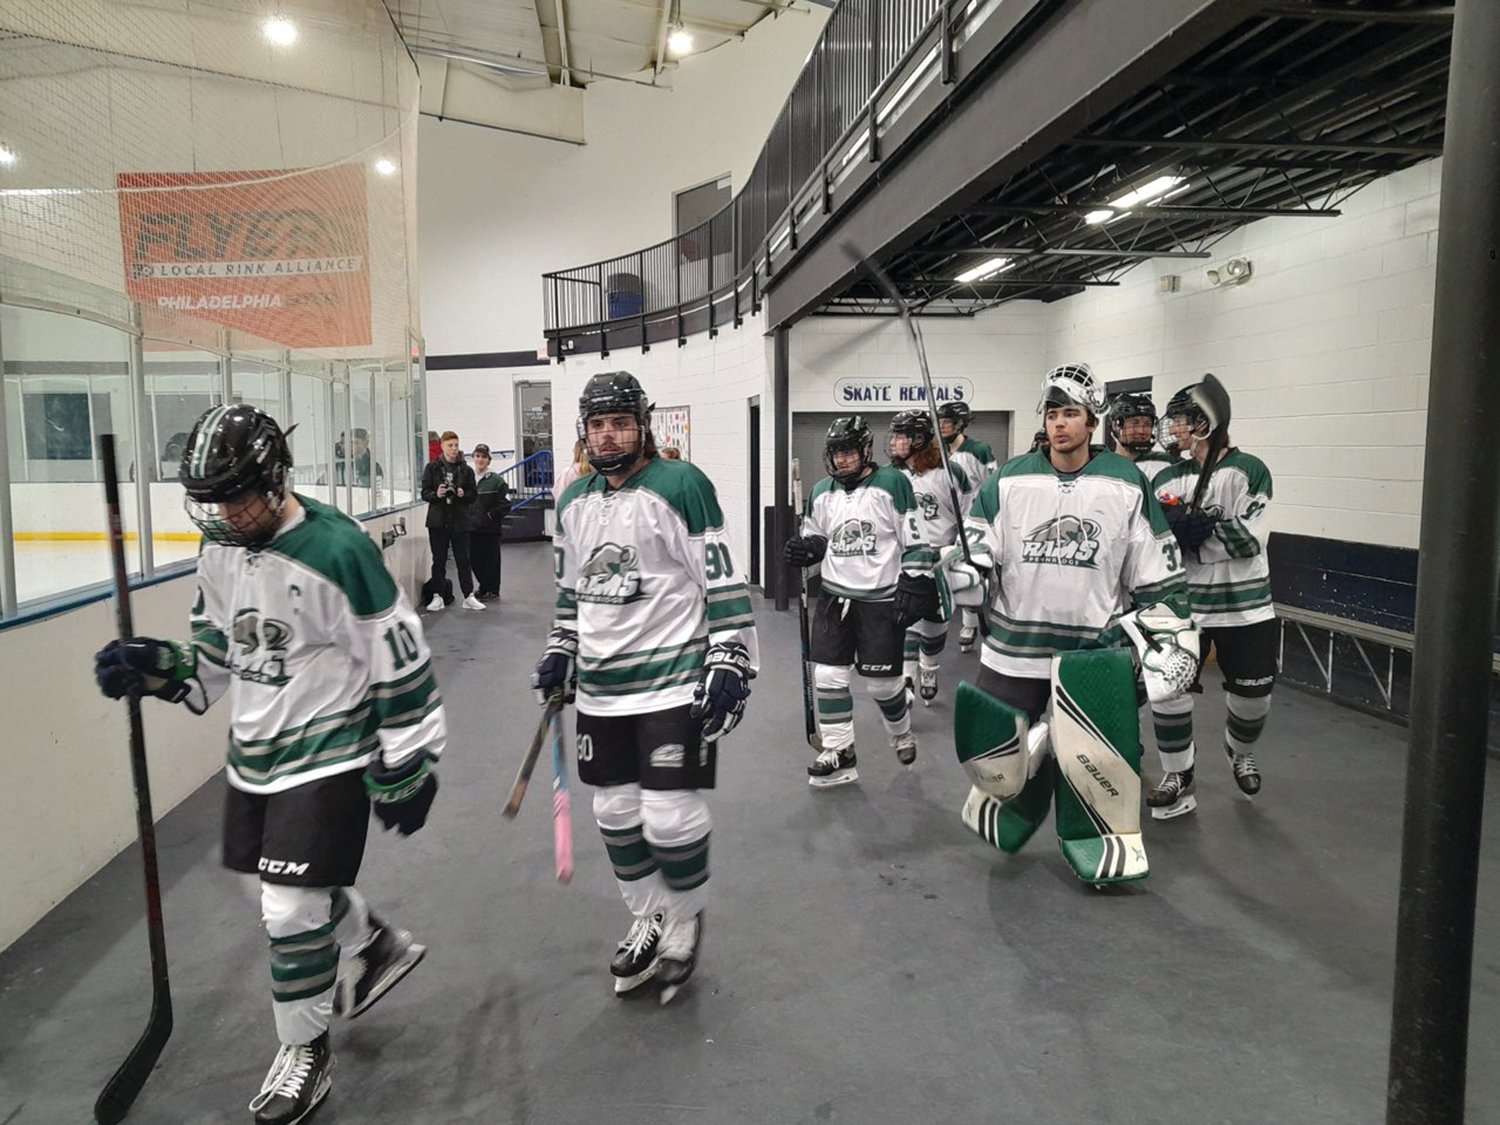 Don Leypoldt
The Pennridge Rams take the ice in last Thursday’s game against Pennsbury. The Rams won 11-4.